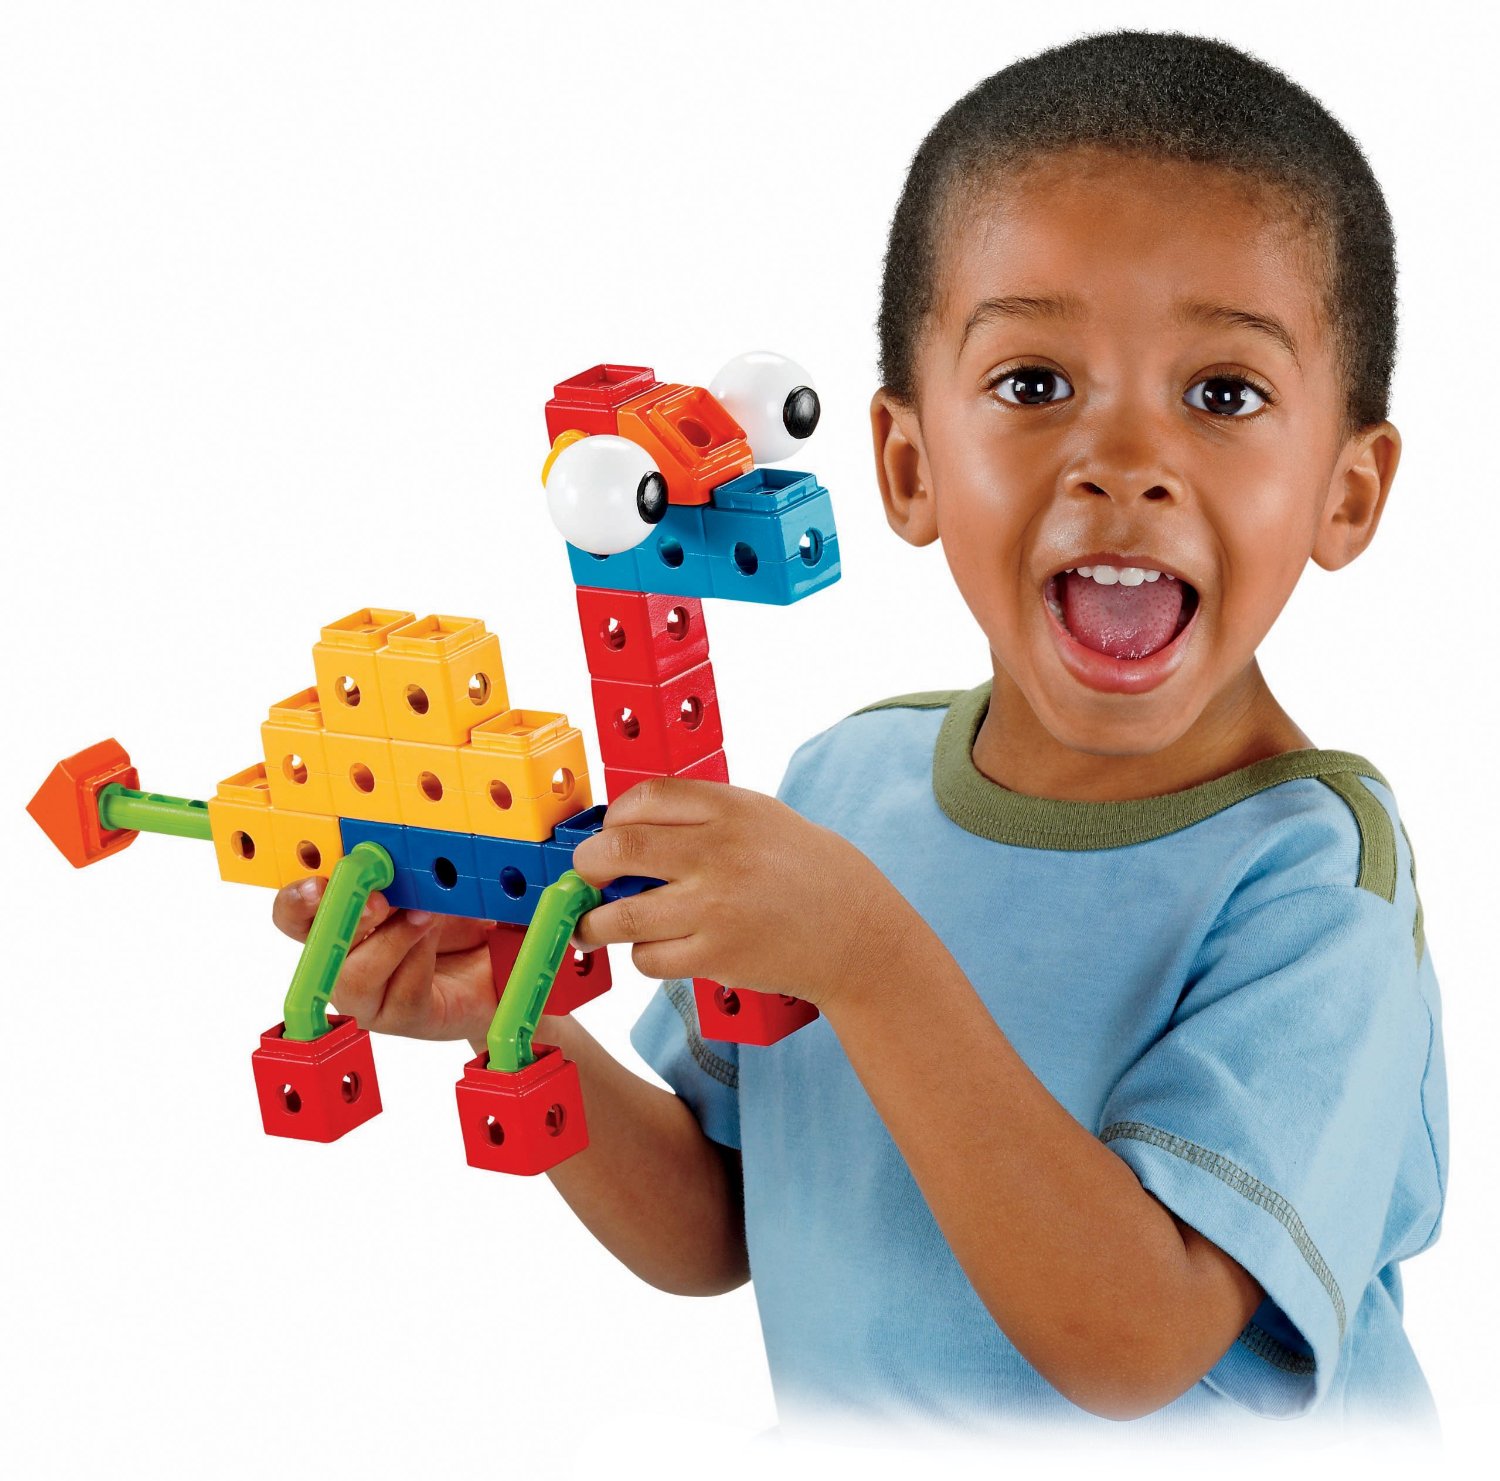 What toy models a construction principle